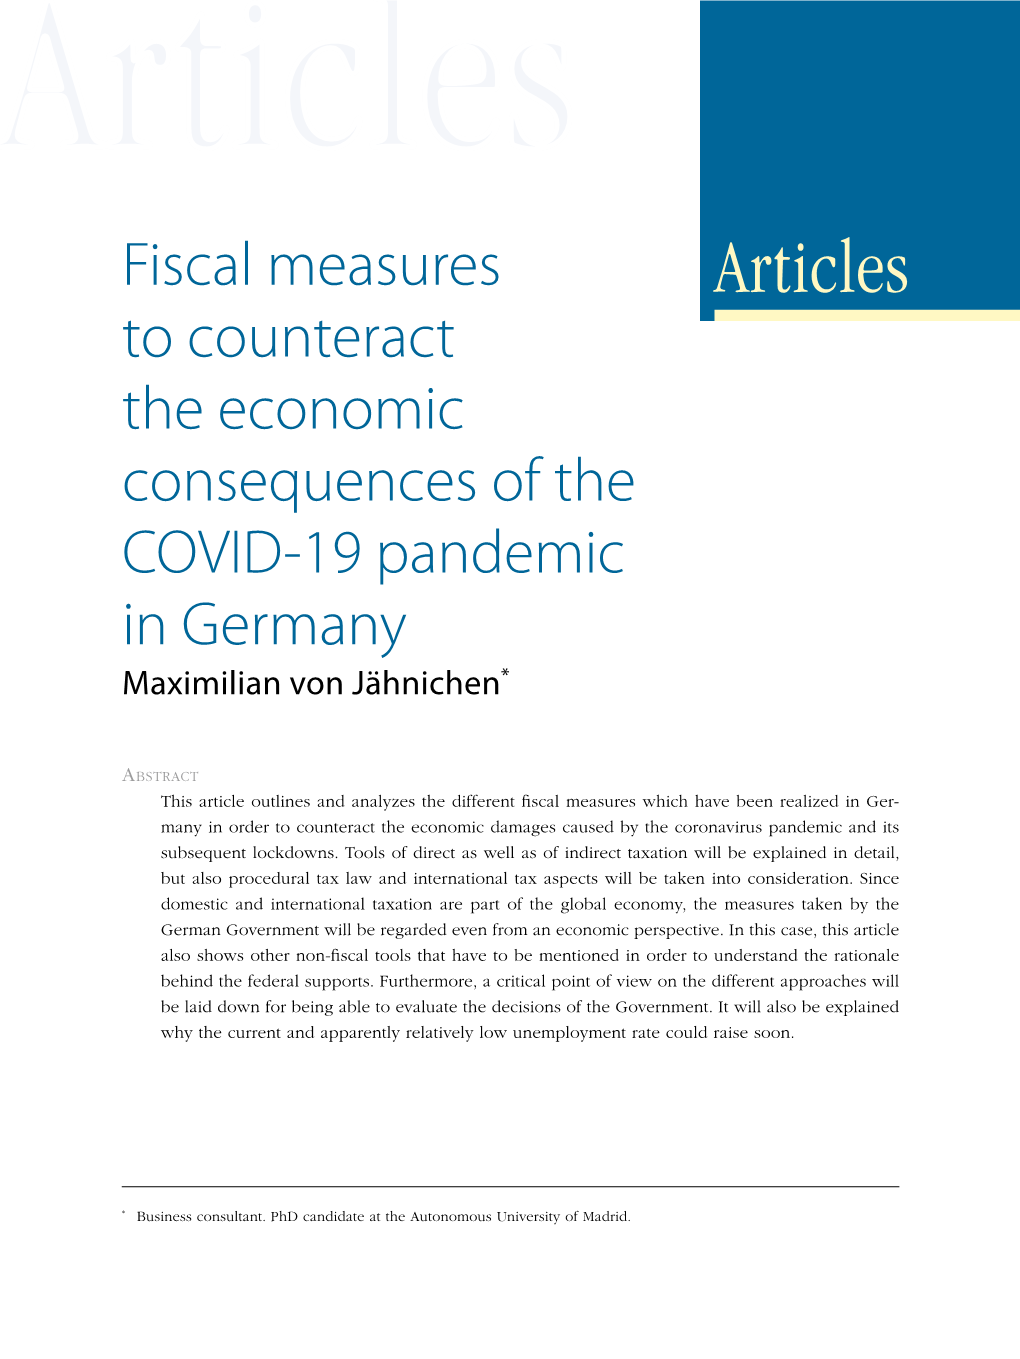 Fiscal Measures to Counteract the Economic Consequences of the COVID-19 Pandemic in Germany